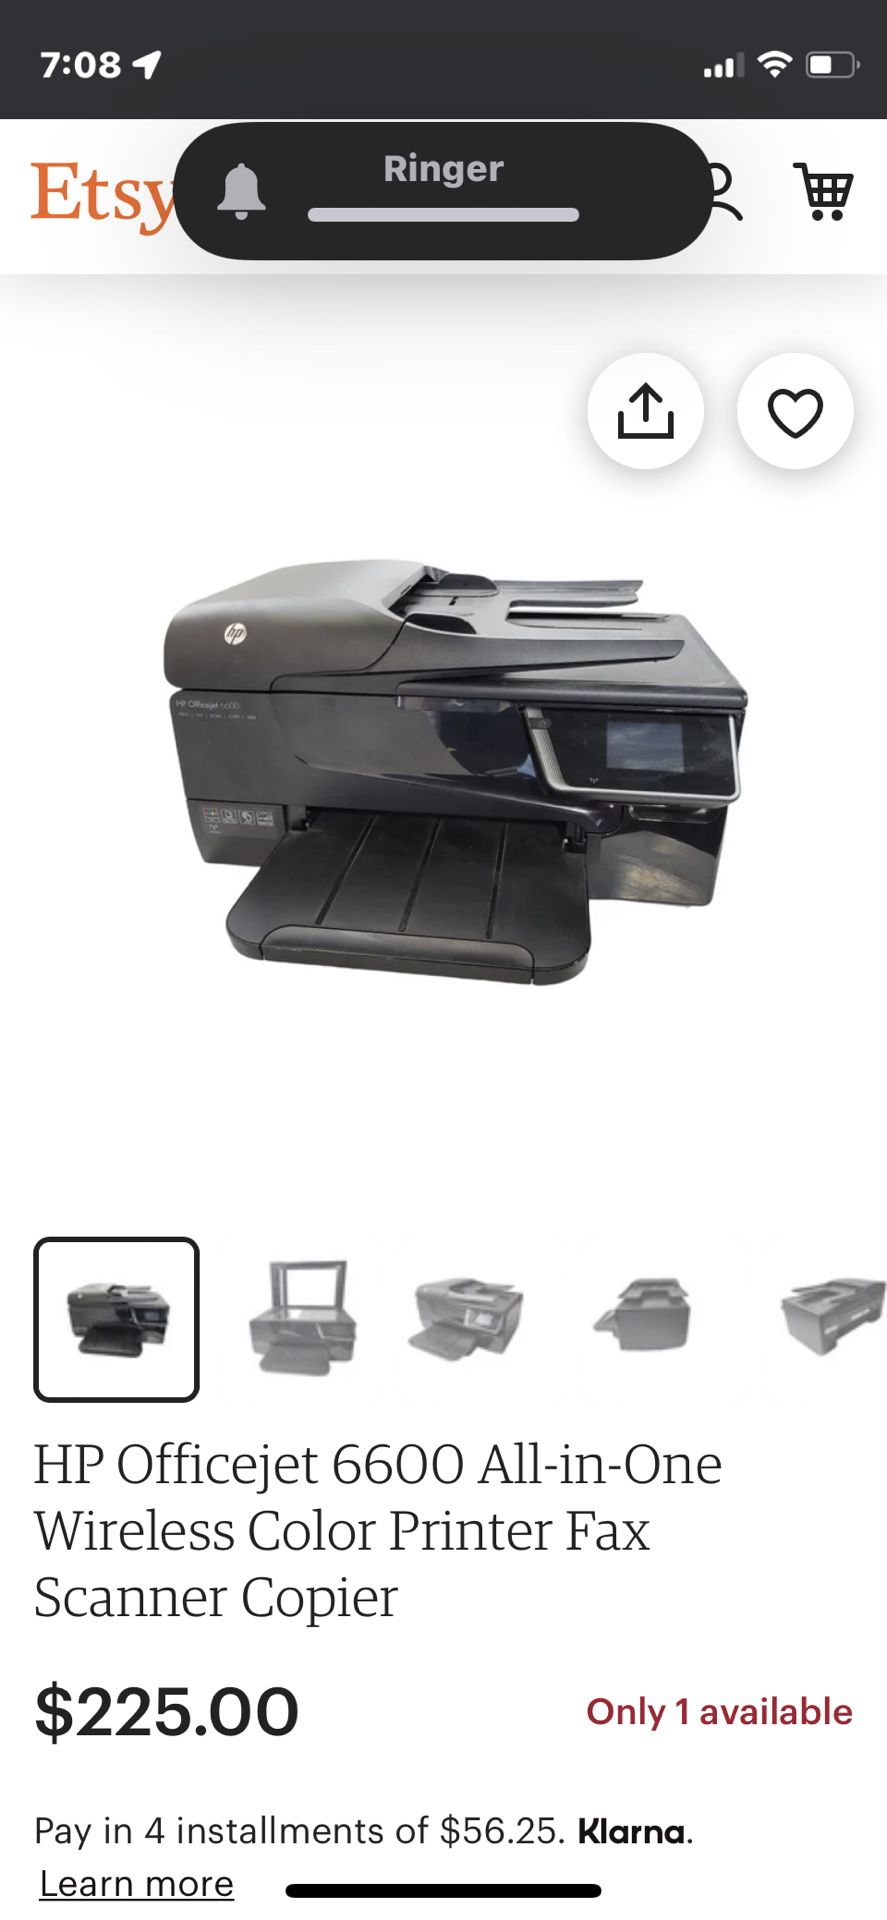 Wireless Copier Scanner Fax And More 